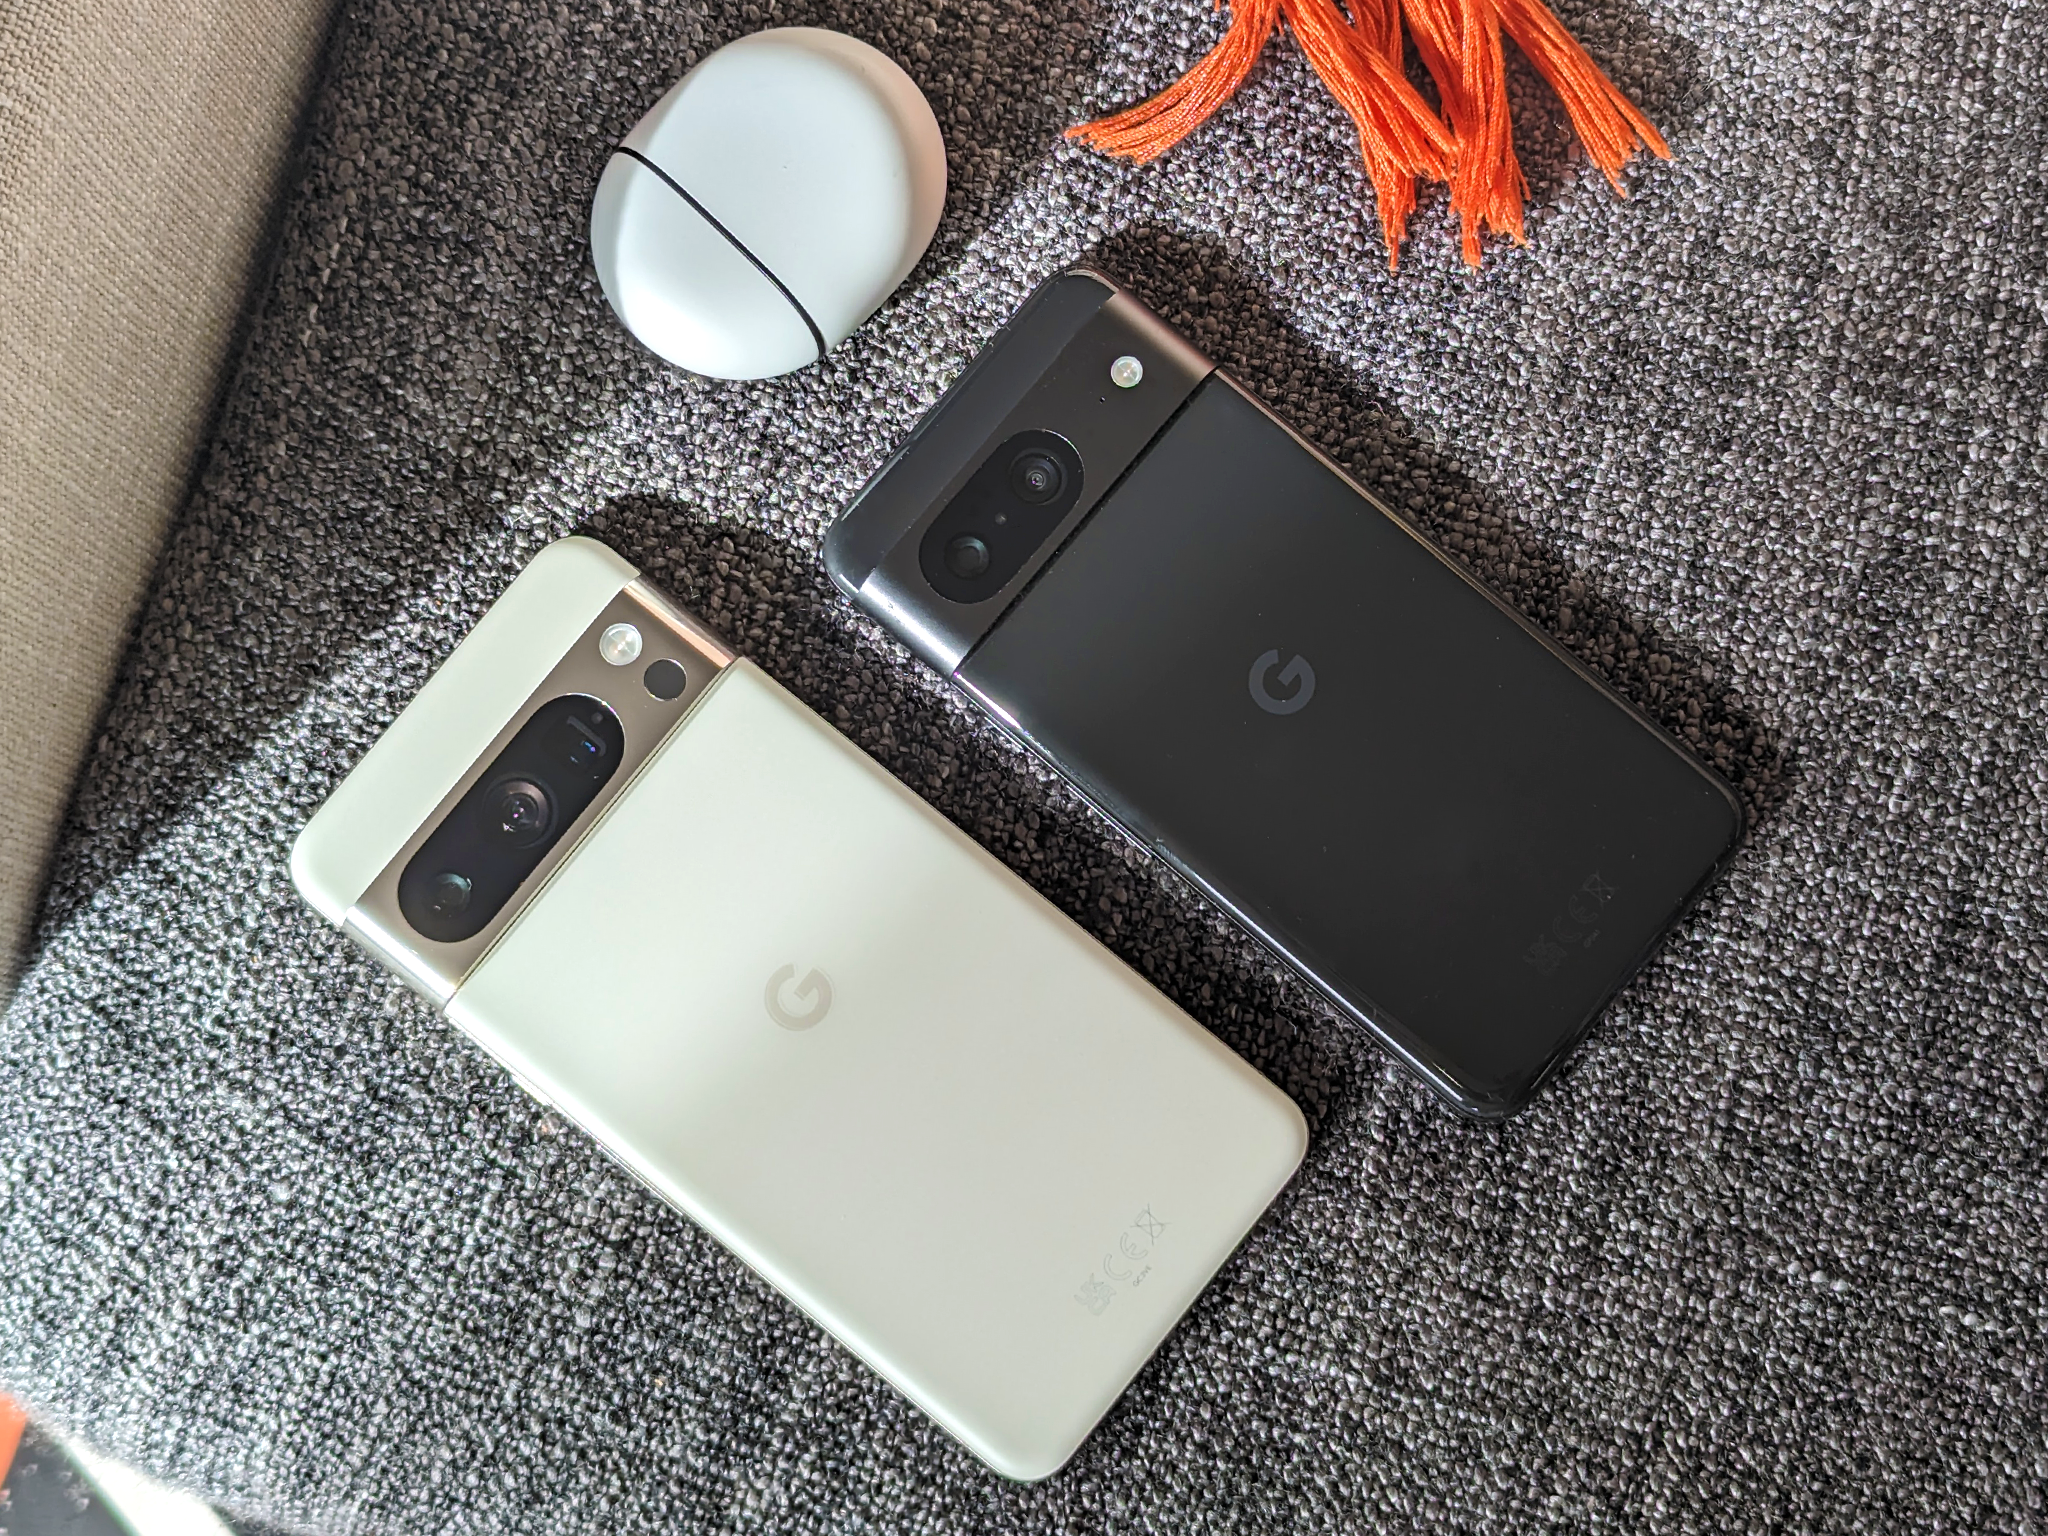 The new Pixel phones are packed with practical features